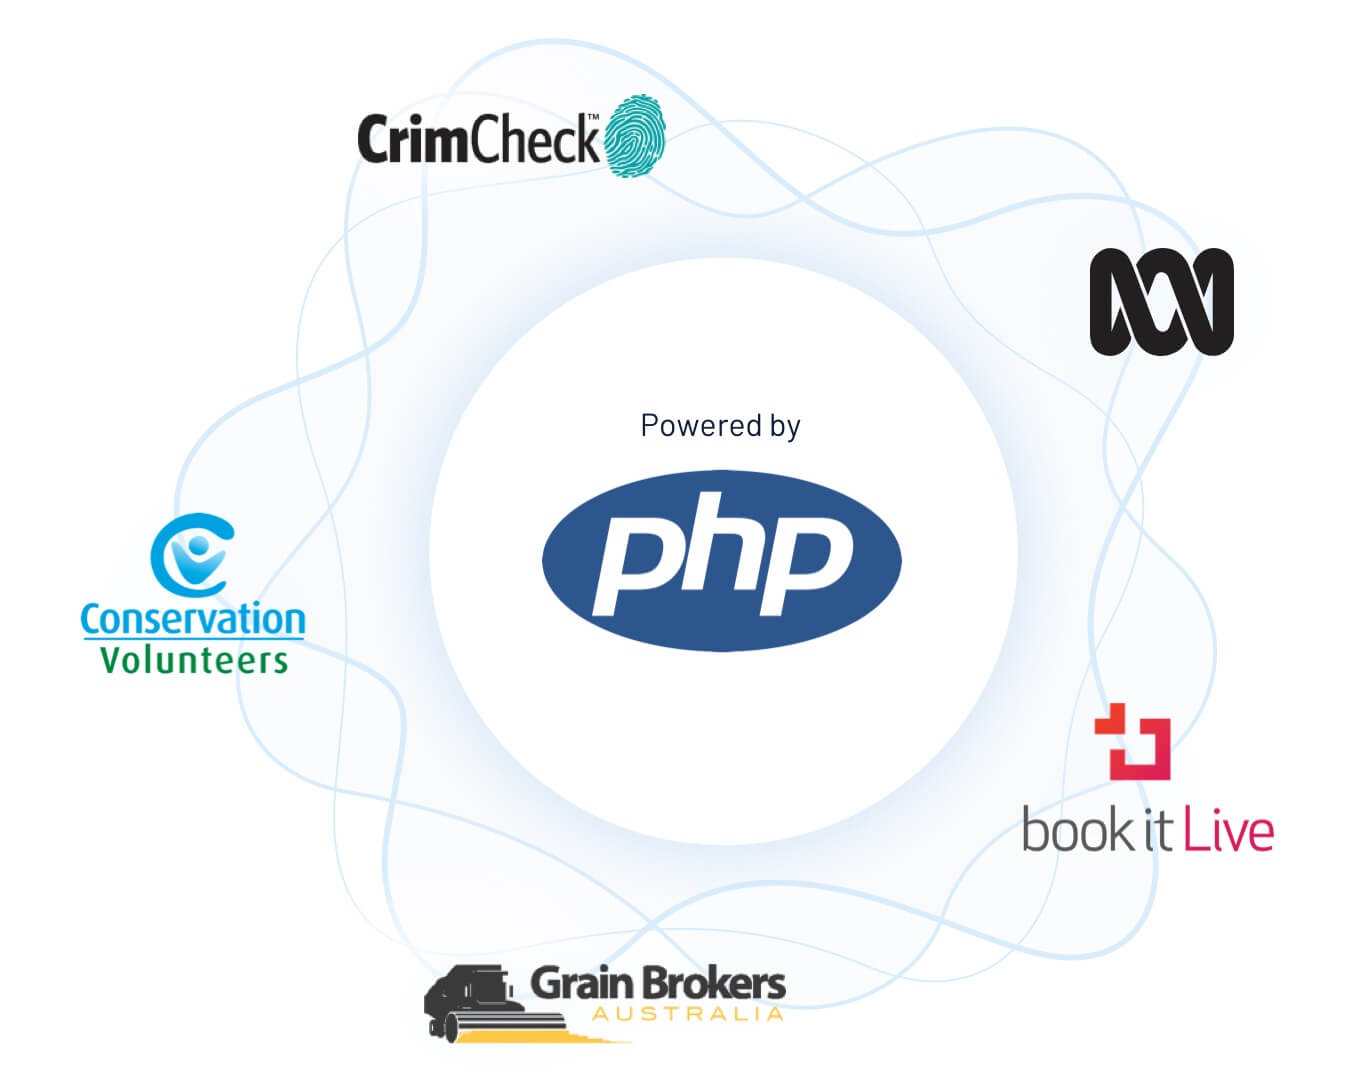 CrimCheck, ABC, Conservation volunteers, Grain Brokers and Book it Live all run on PHP